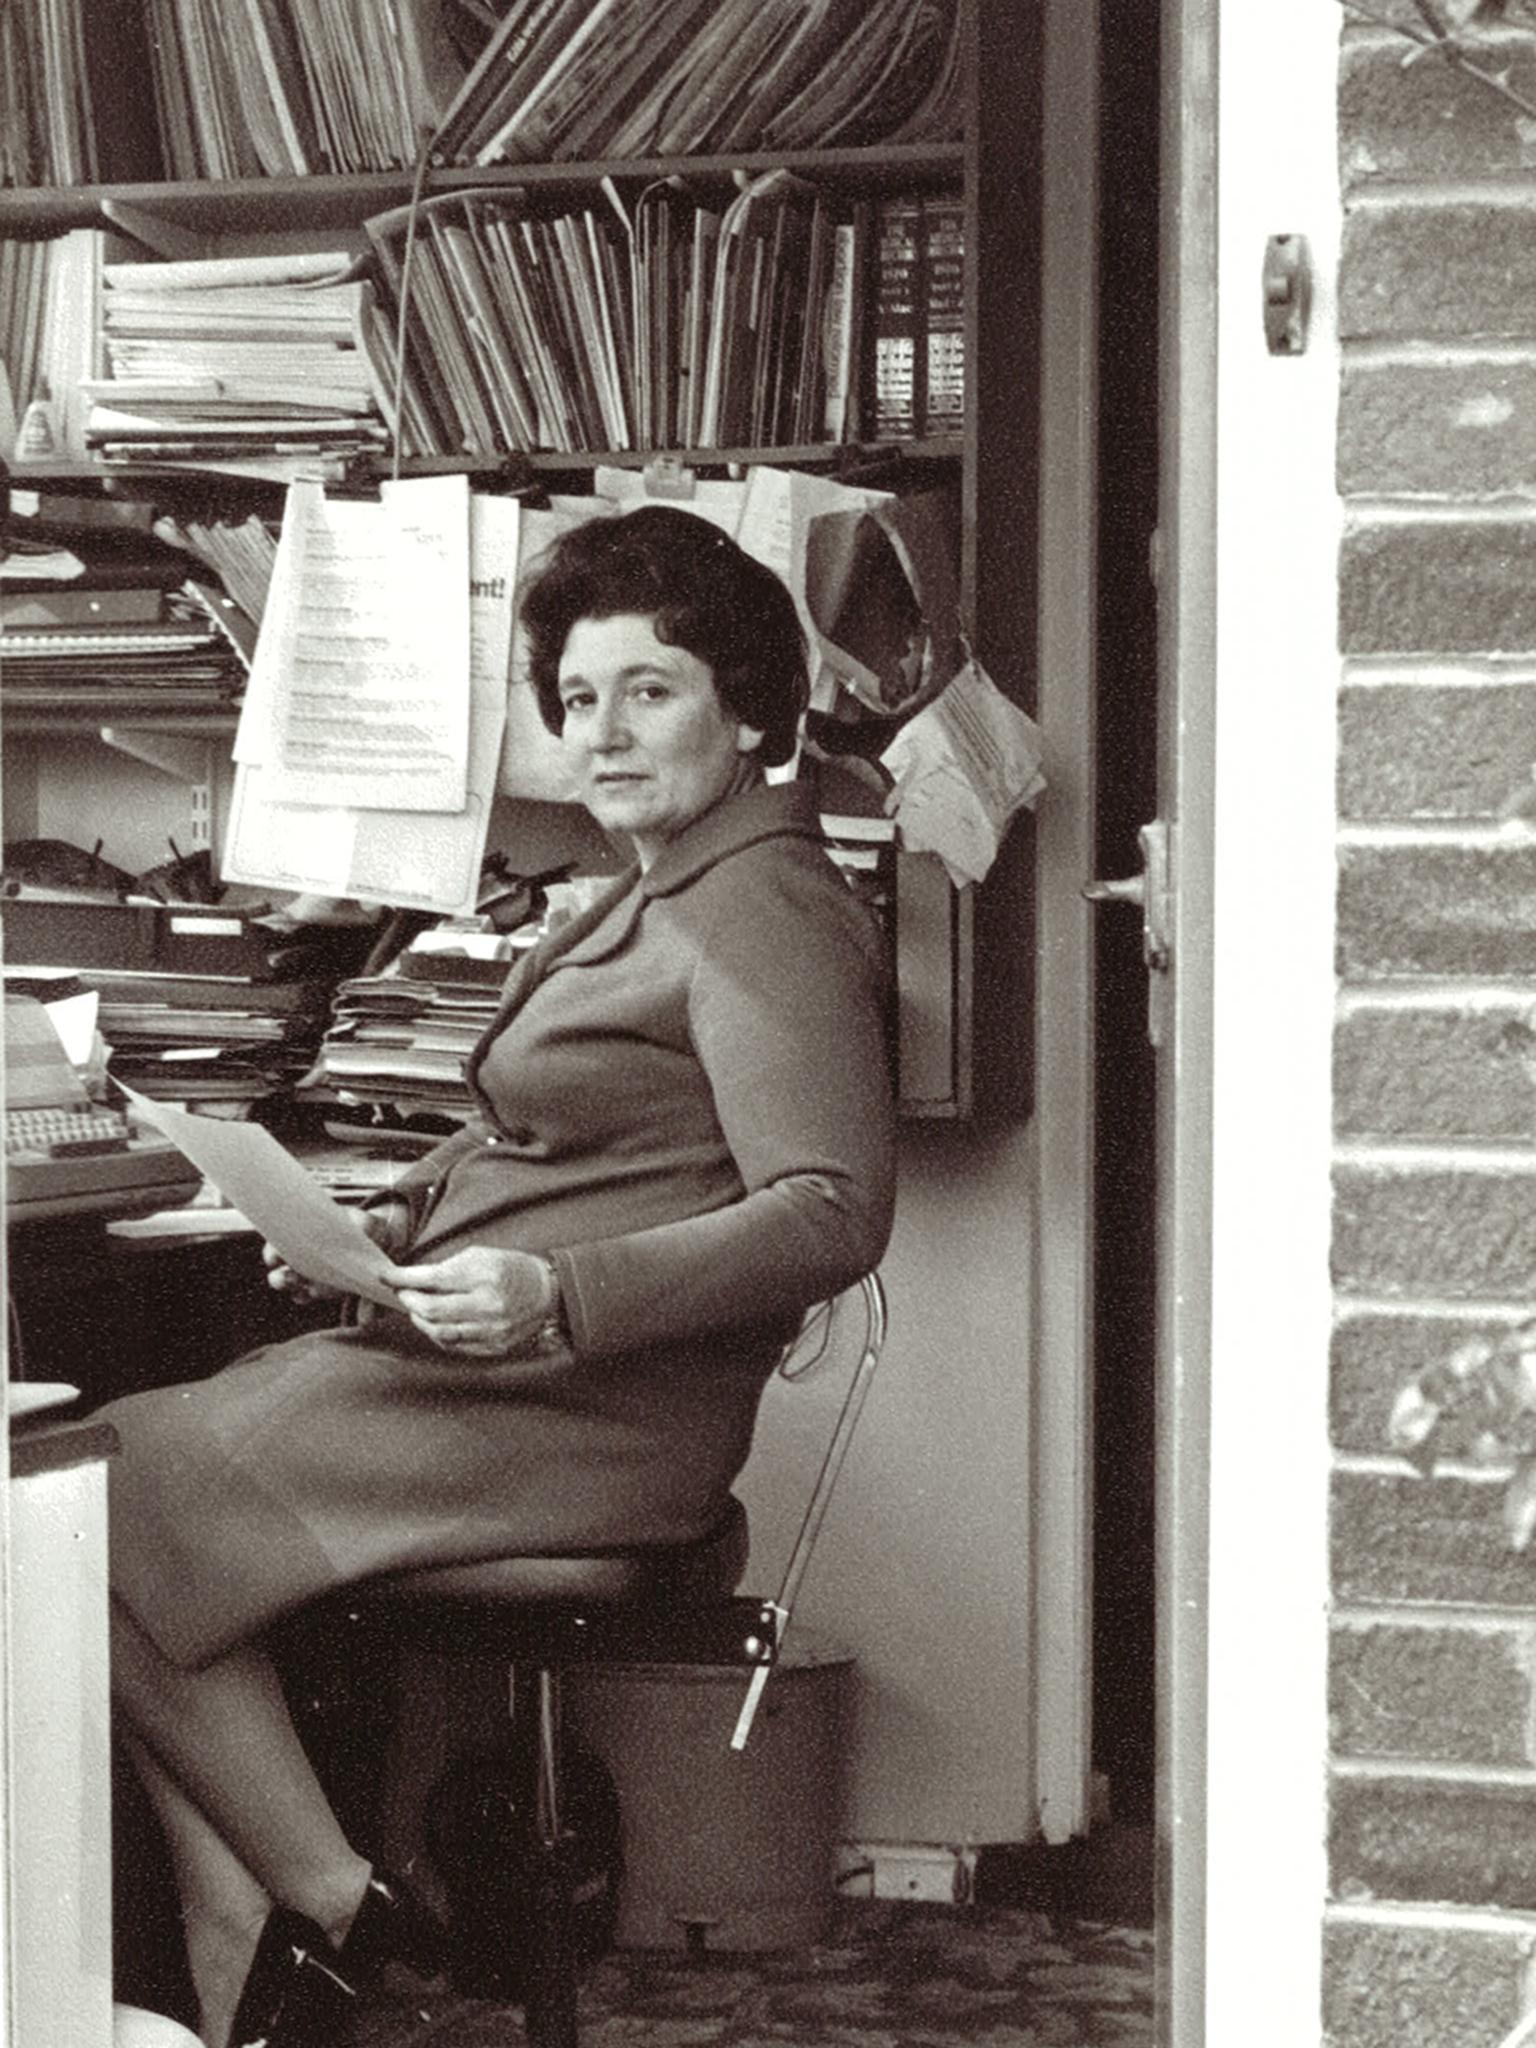 Diane Munday in her home office in the 1960s